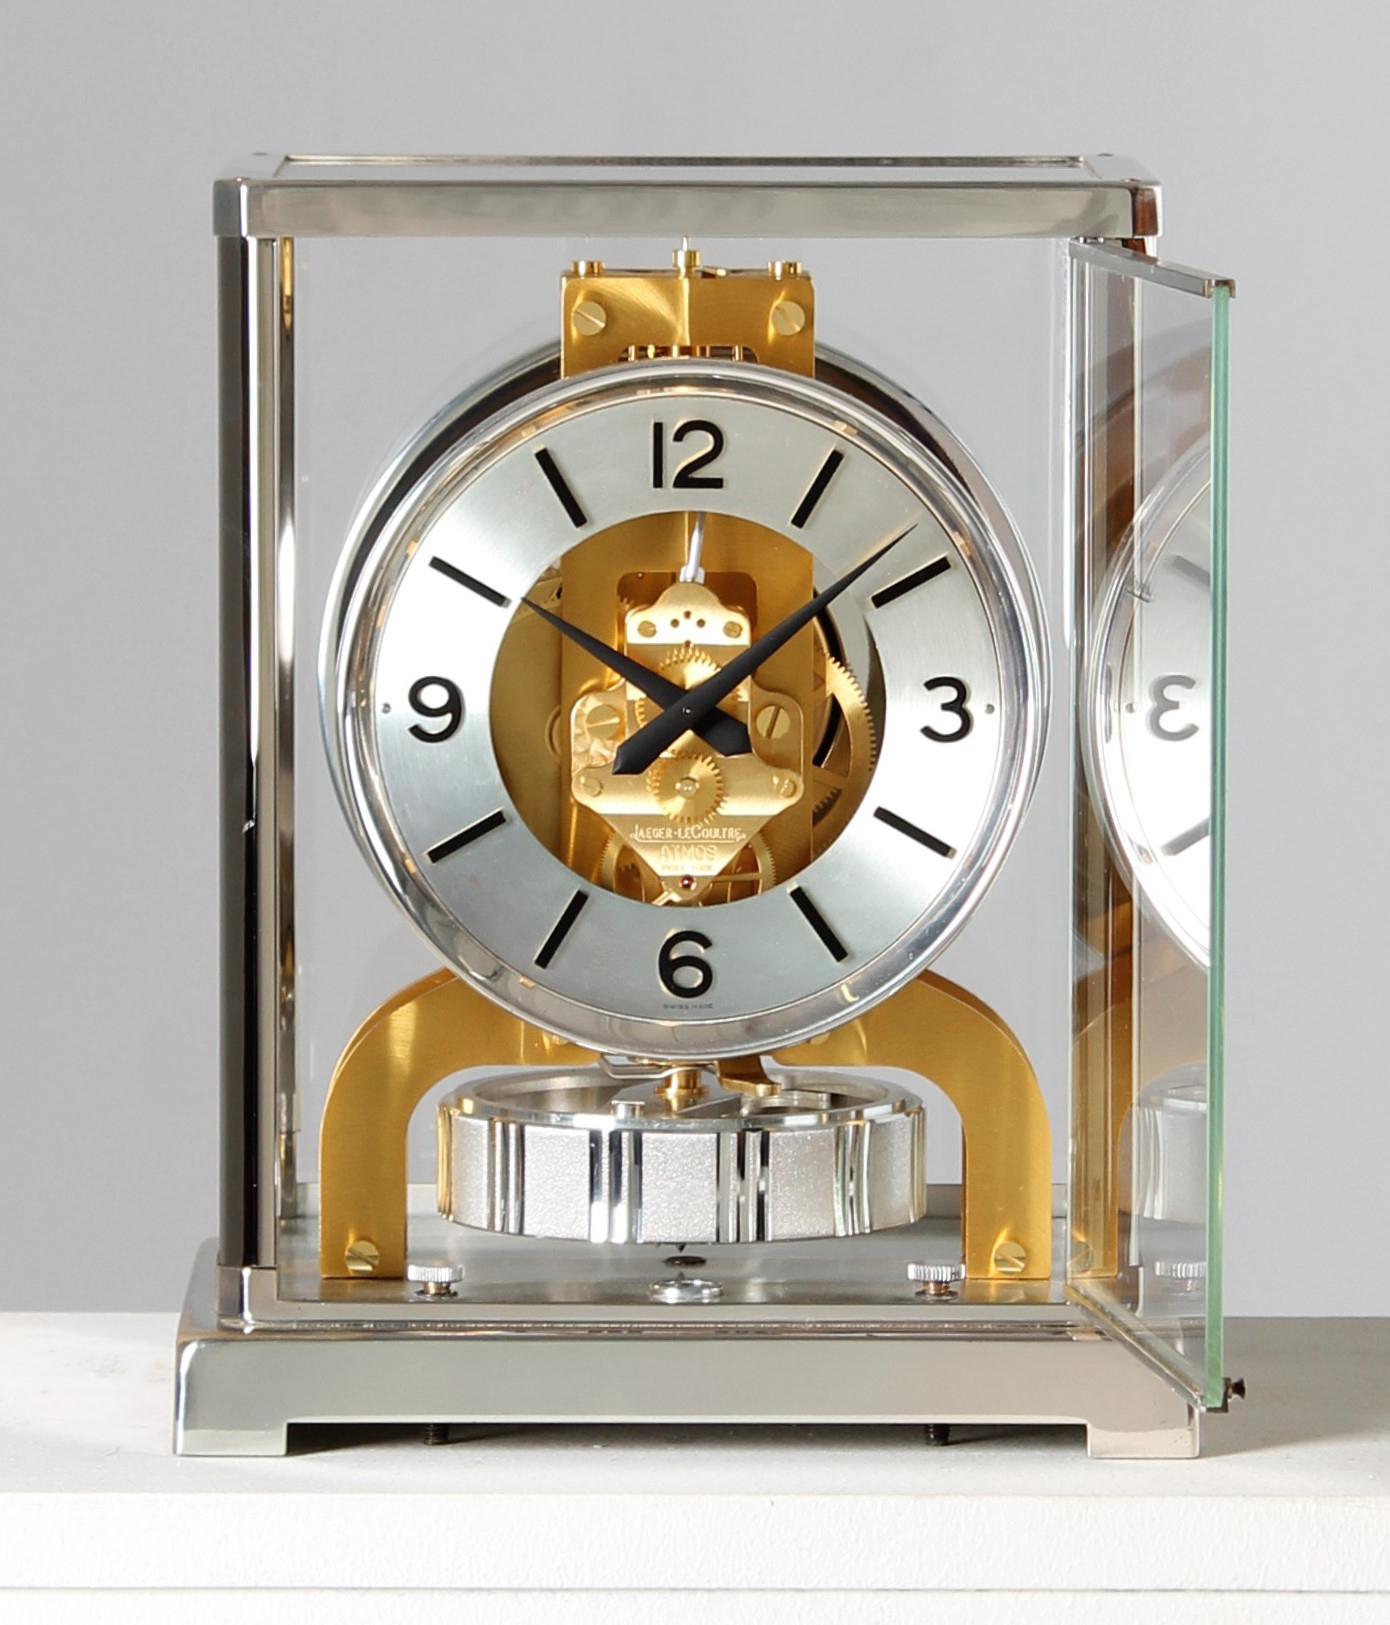 Jaeger LeCoultre - Atmos clock in silver-gold bicolour version

Switzerland
Nickel-plated and gold-plated brass
Year of manufacture 1978

Dimensions: H x W x D: 22 x 18 x 13.5 cm

Description:
The Atmos V calibre 526 was offered in numerous